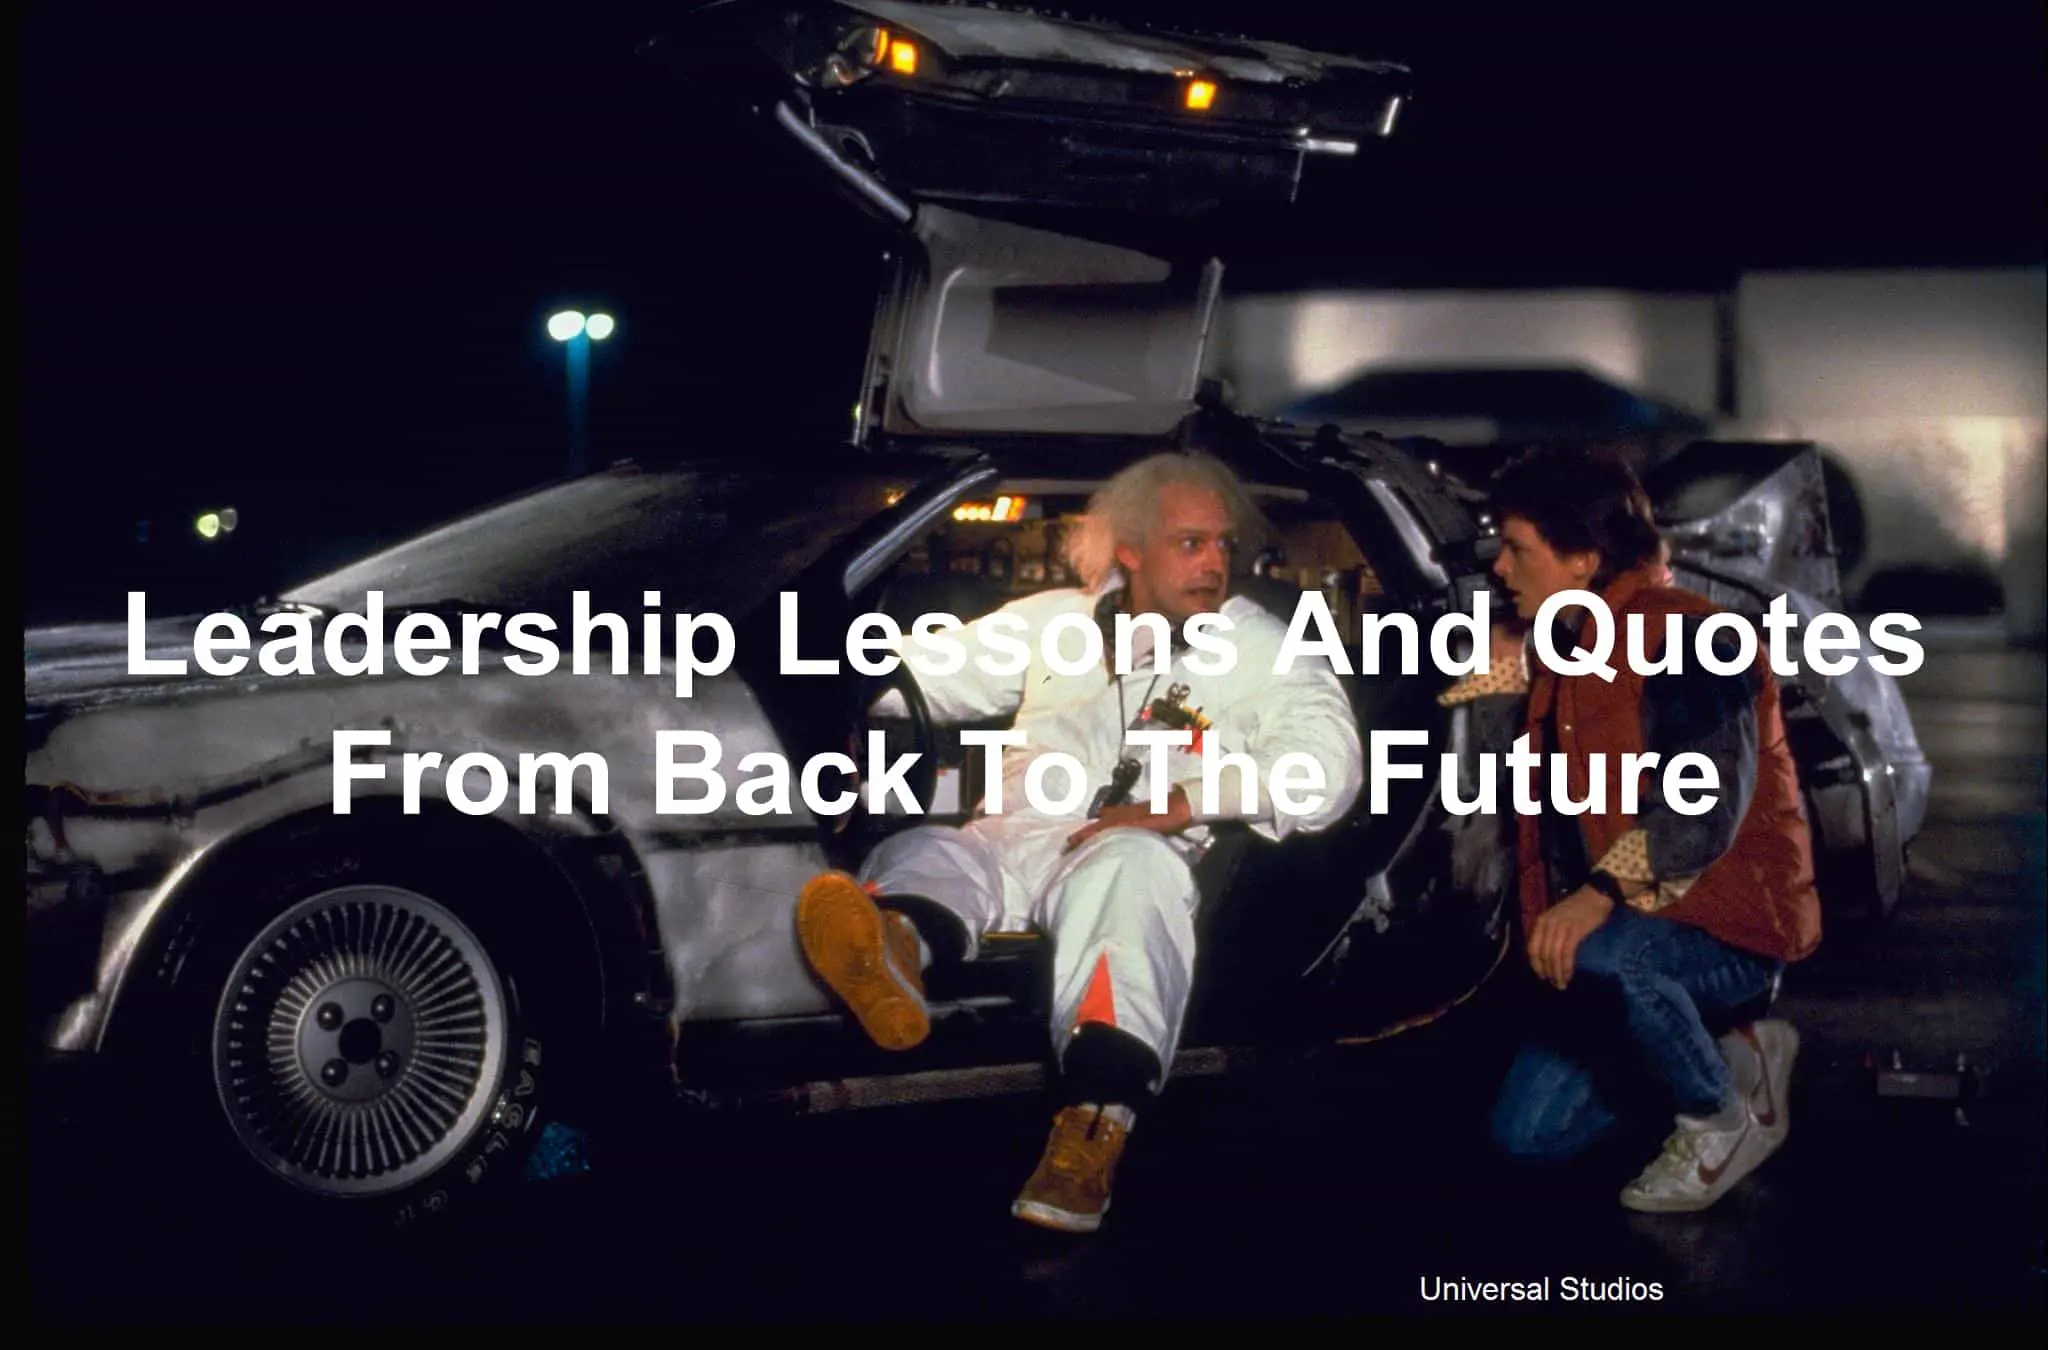 Doc Brown and Marty McFly in a DeLorean - Leadership lessons and quotes from Back To The Future